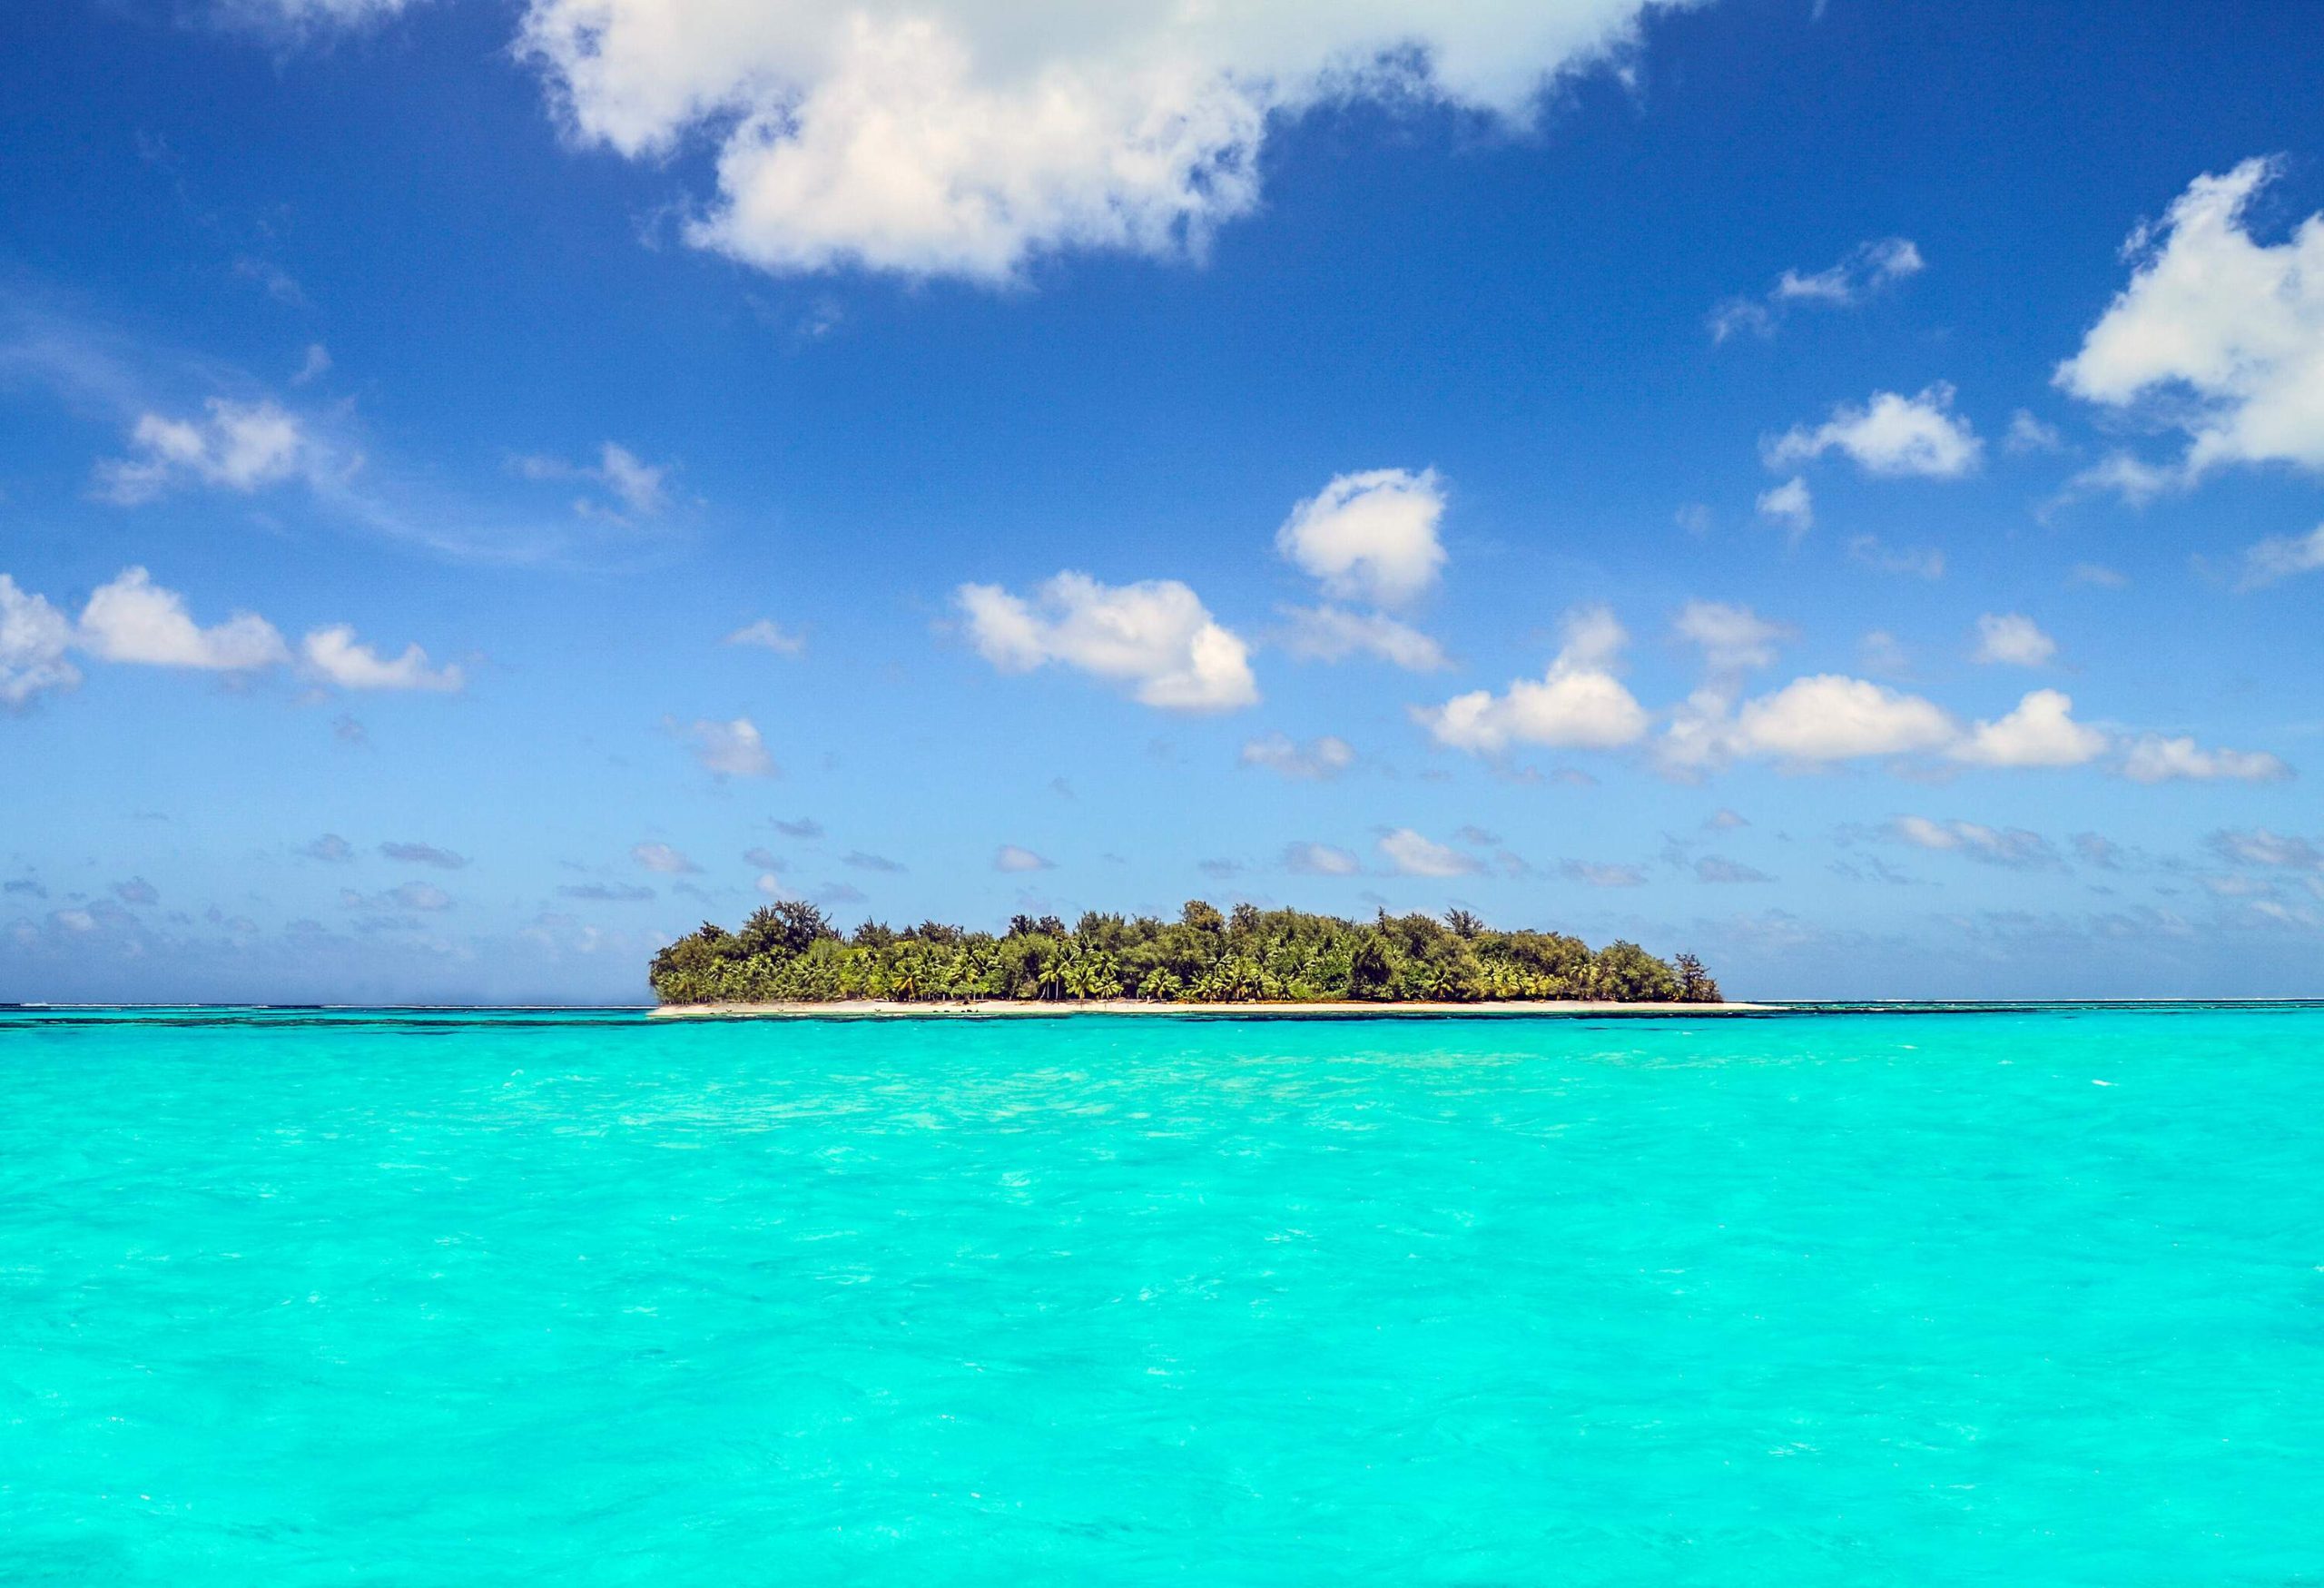 An island covered in lush tropical trees in the centre of a turquoise ocean.